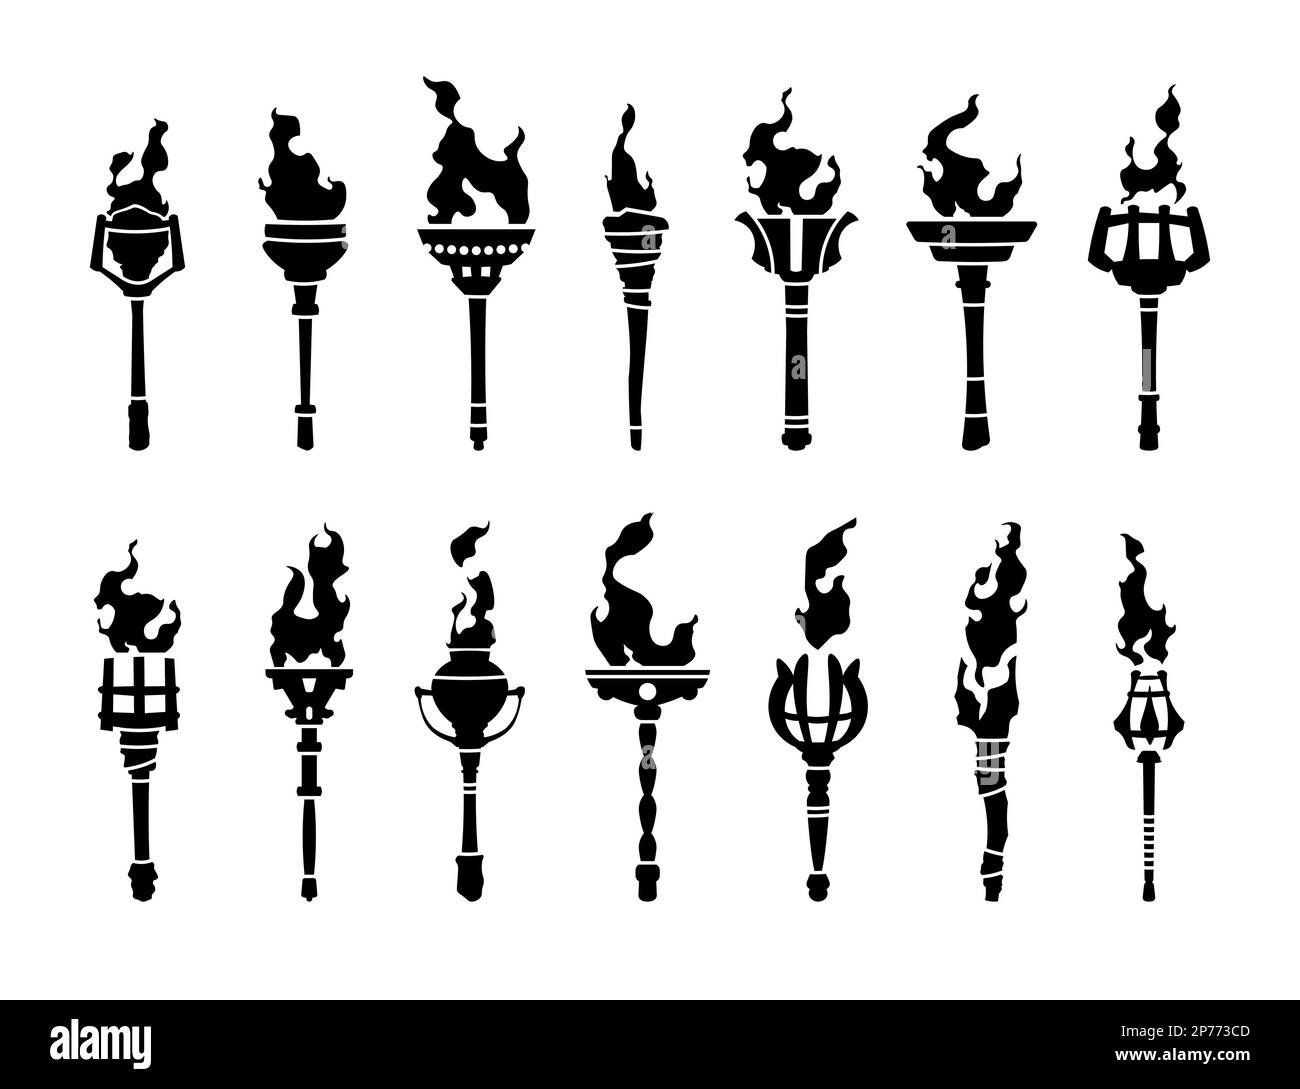 Black torch icons. Medieval burning fire blaze silhouettes, fiery flaming stick icons, liberty achievement championship concept. Vector set Stock Vector